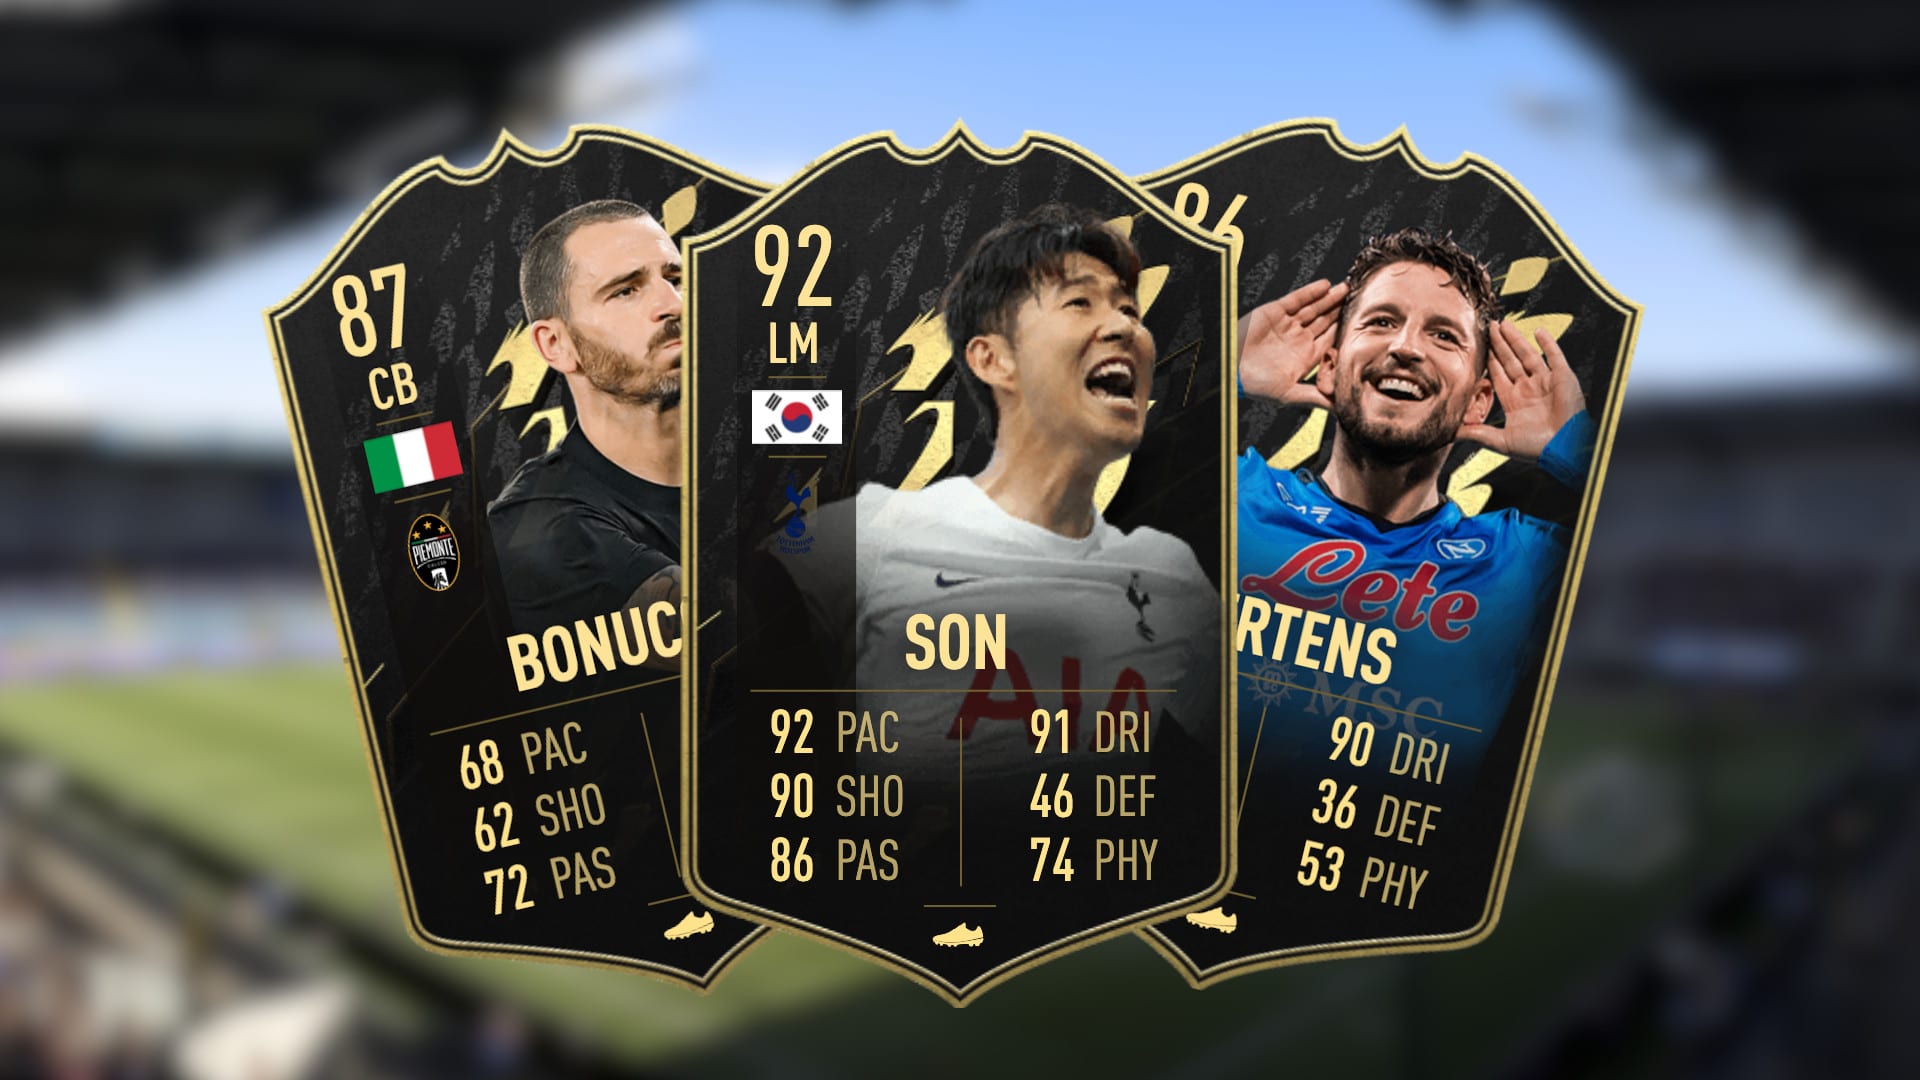 FIFA 22 TOTW 33: The Predictions for the New Team of the Week - With Son